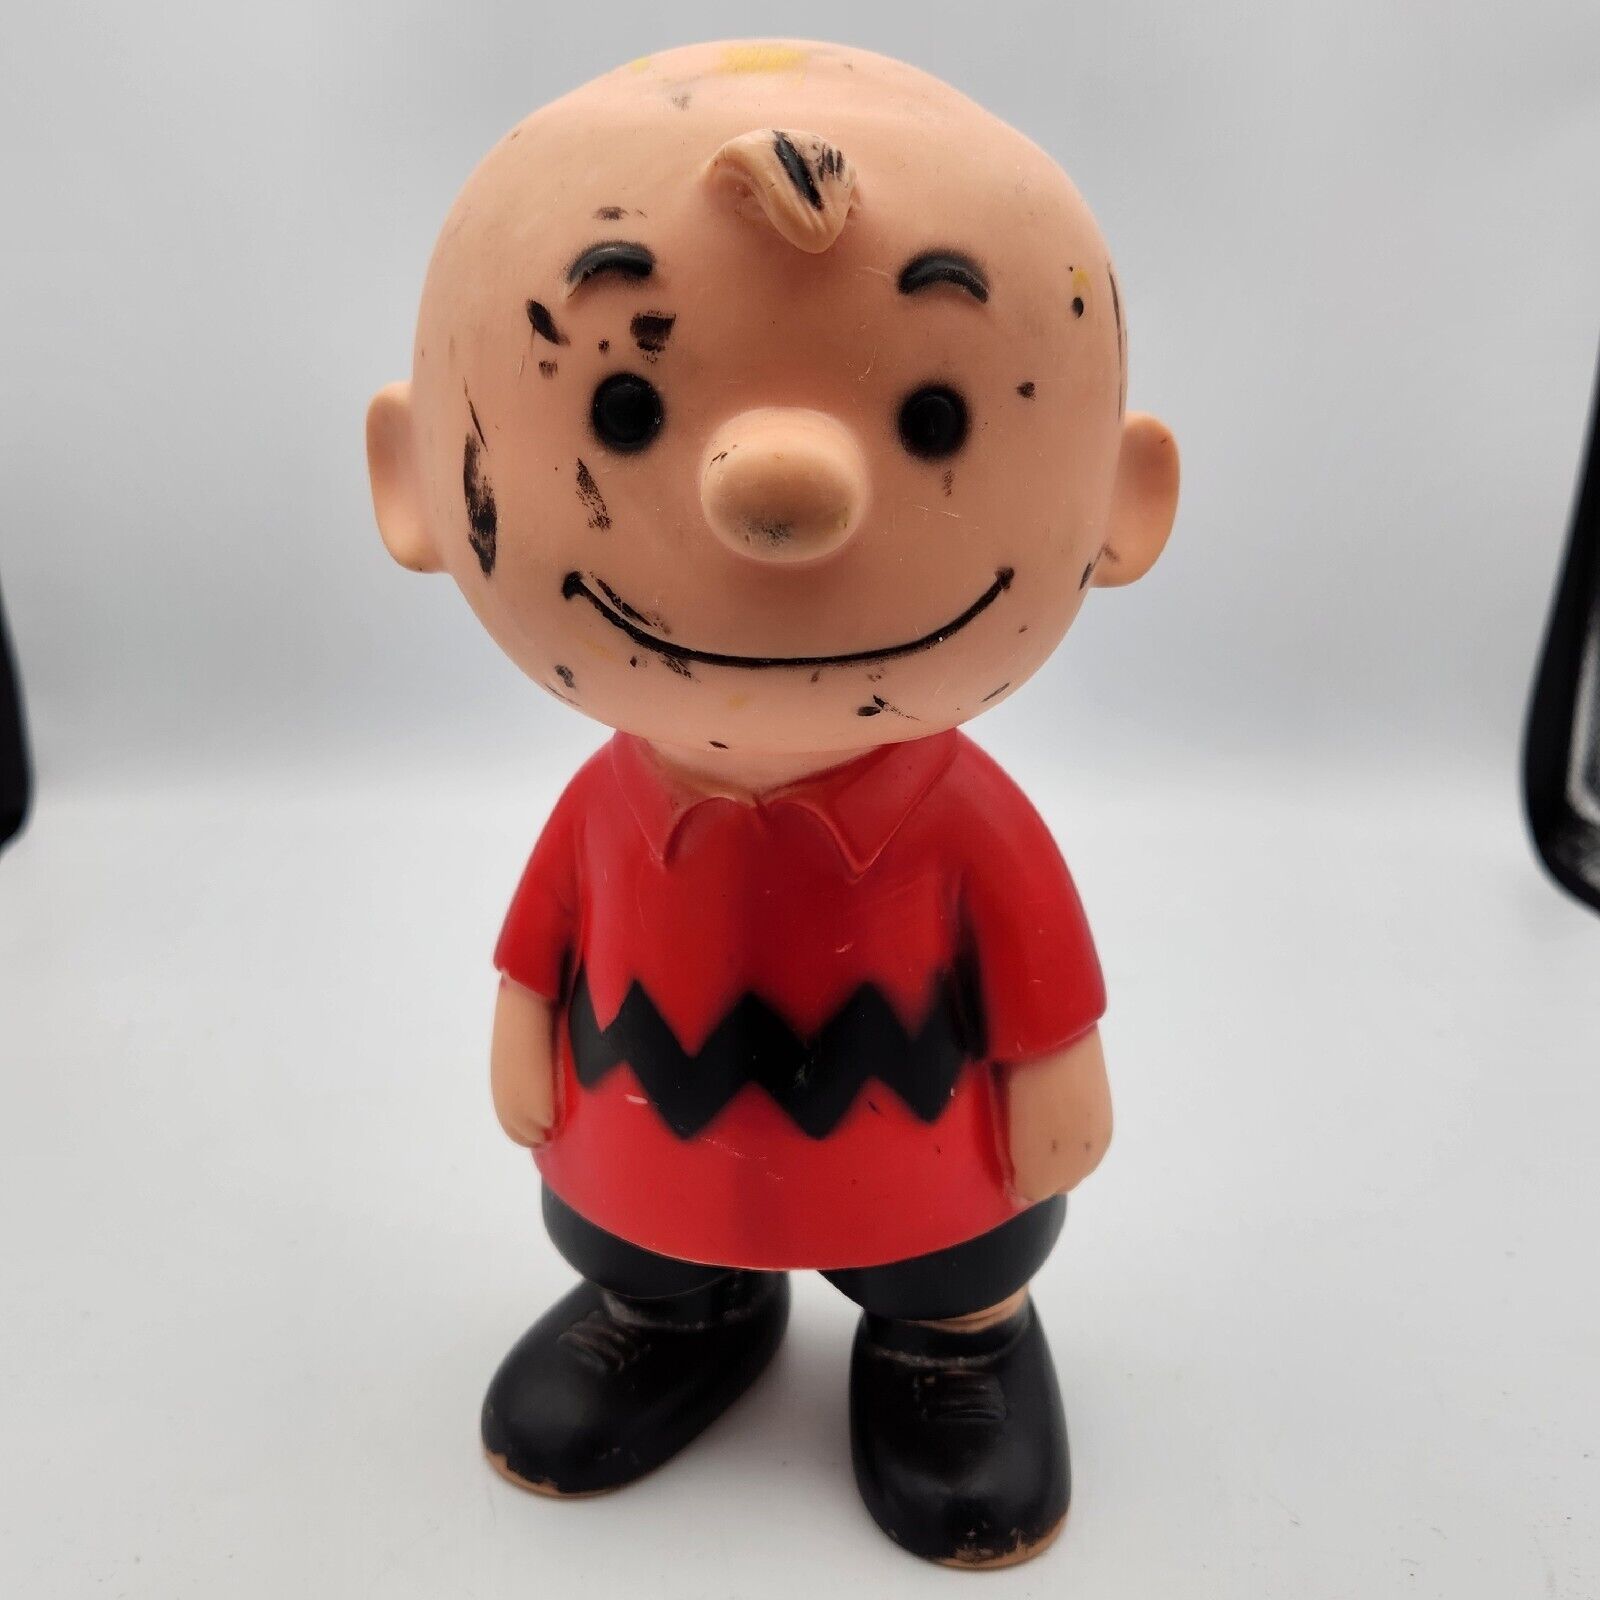 VINTAGE CHARLIE BROWN 1958-1961 9” Hungerford Vinyl United Feature Syndicate